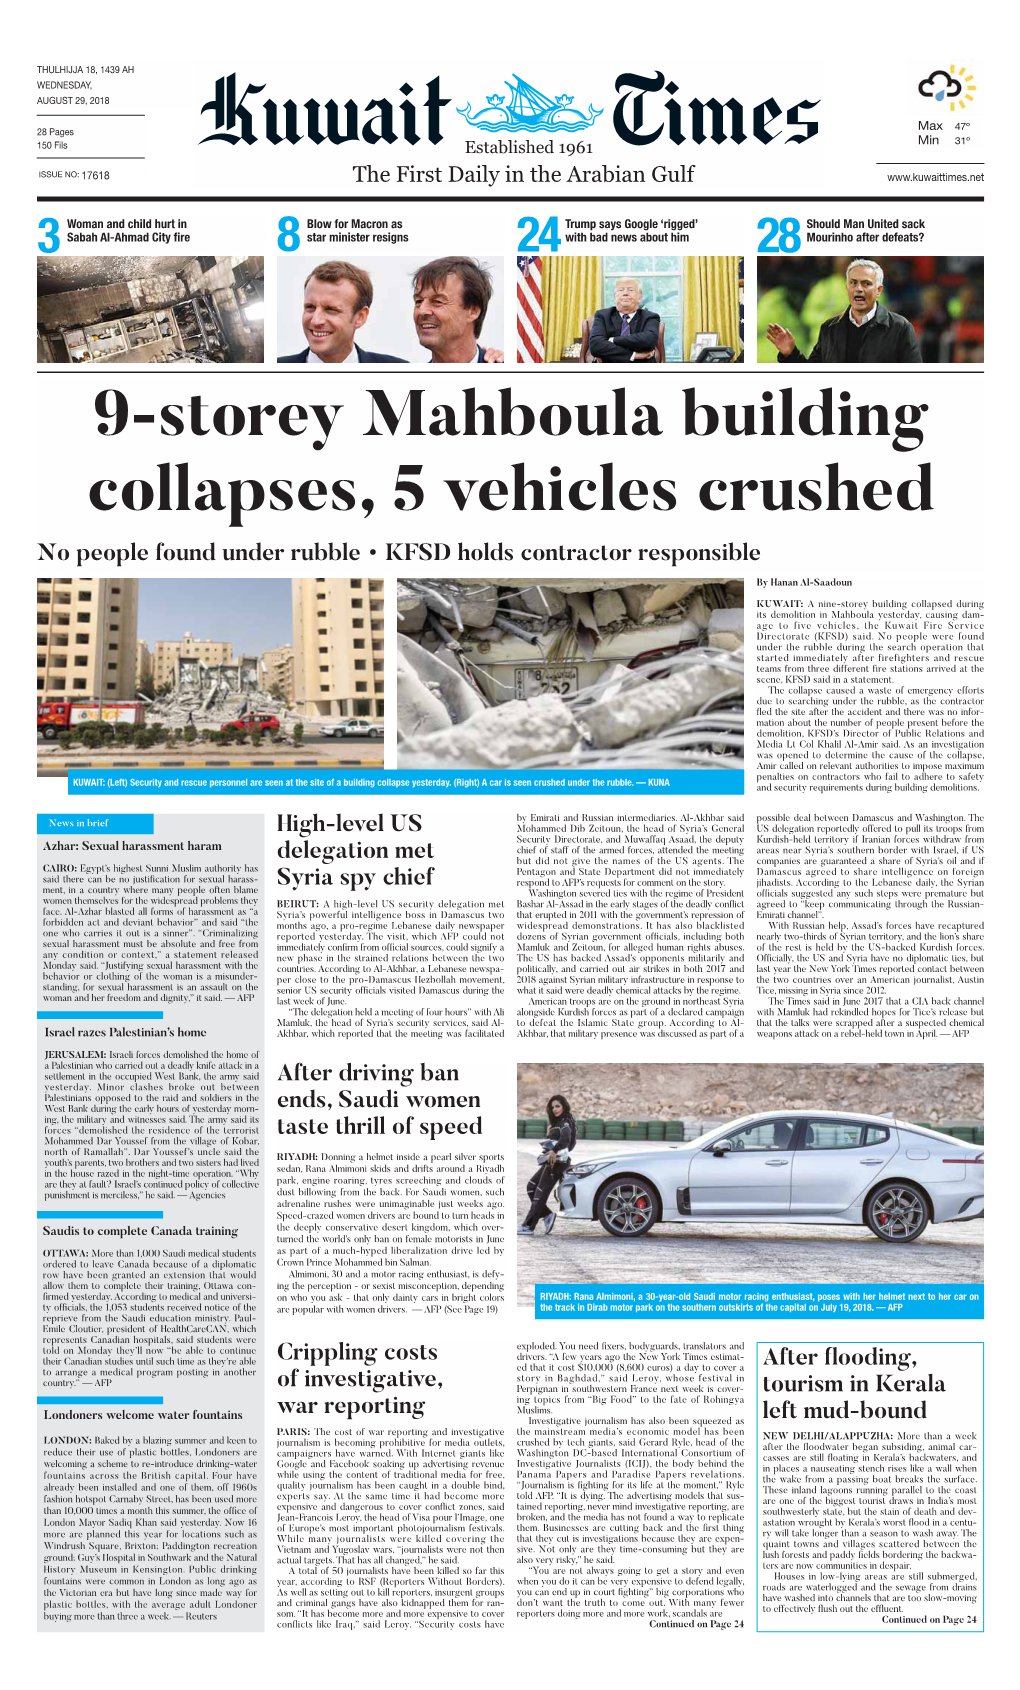 9-Storey Mahboula Building Collapses, 5 Vehicles Crushed No People Found Under Rubble • KFSD Holds Contractor Responsible